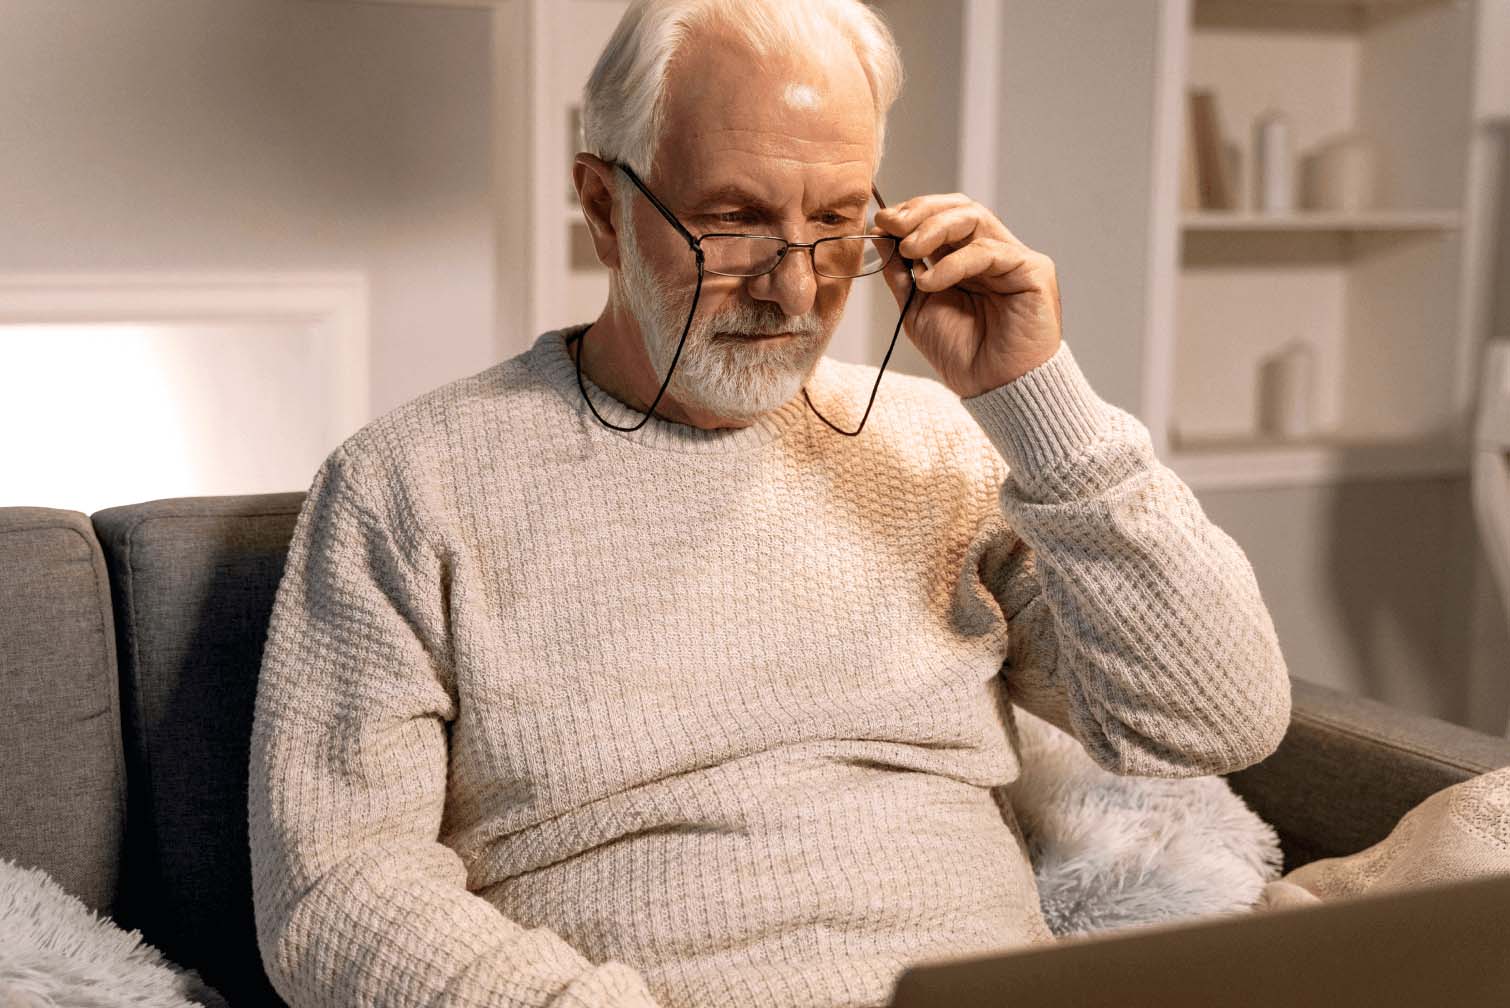 A senior man sitting on a couch, looking at his computer.